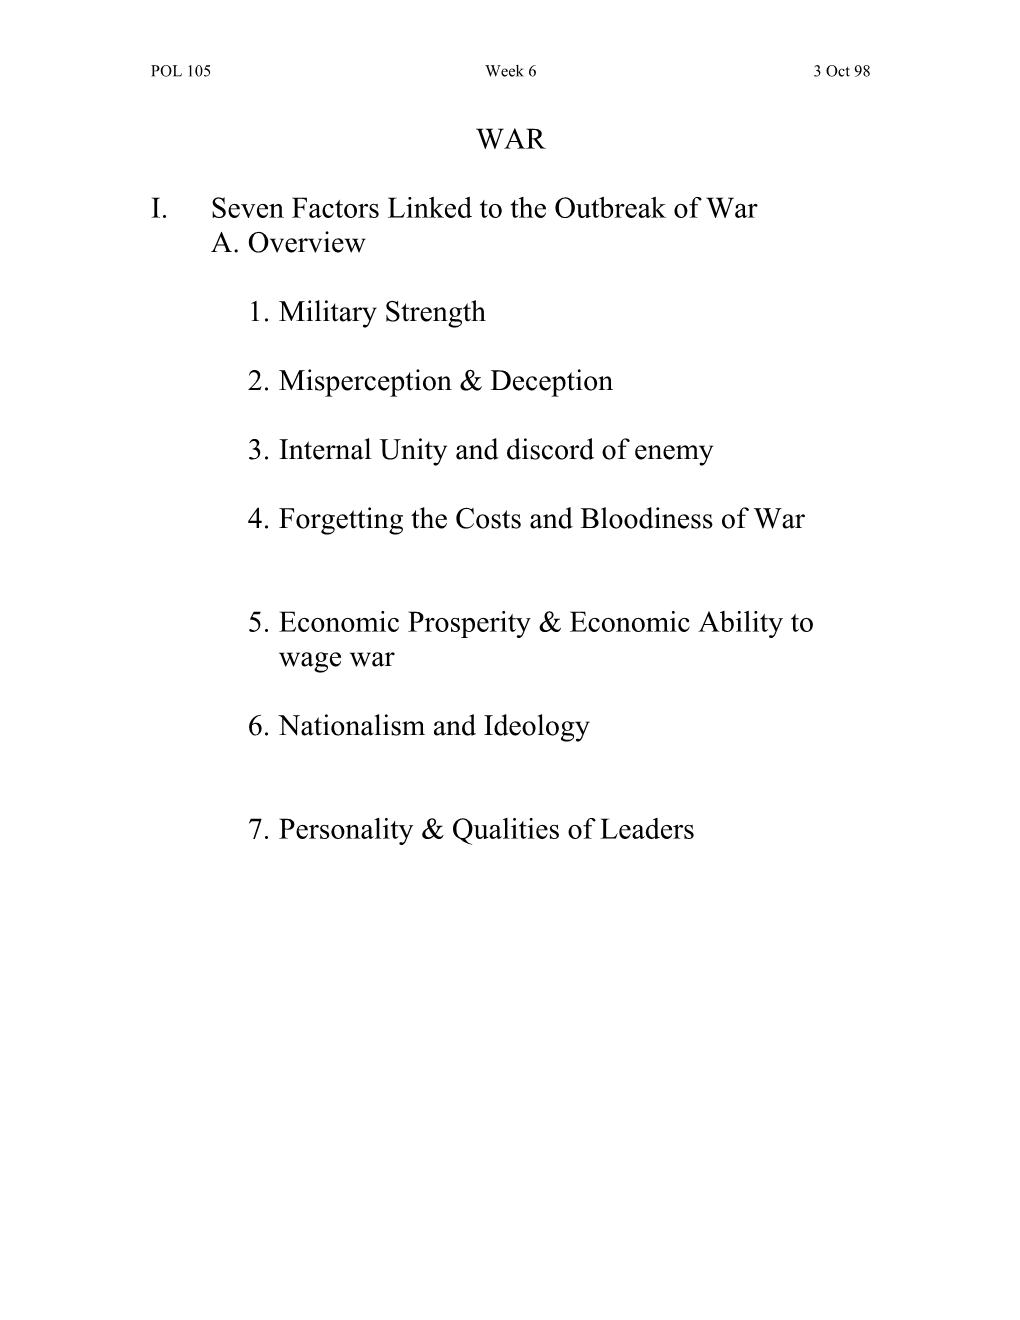 Seven Factors Linked to the Outbreak of War